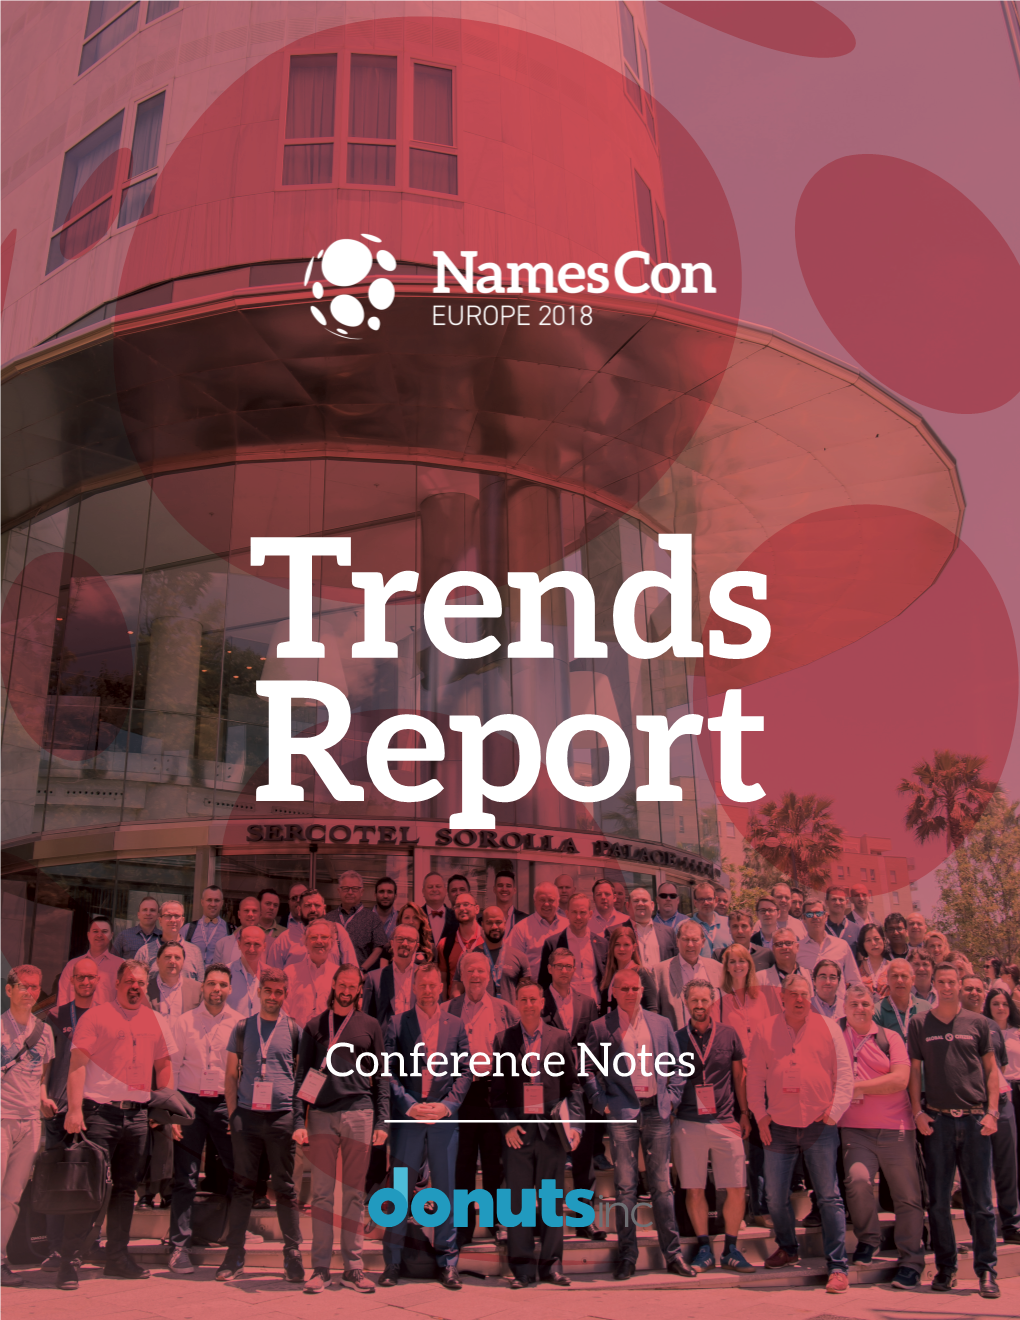 Conference Notes HELLO! We Captured Every Actionable Takeaway, Tweetable Phrase and Inspiring Quote from the Namescon Europe Stage